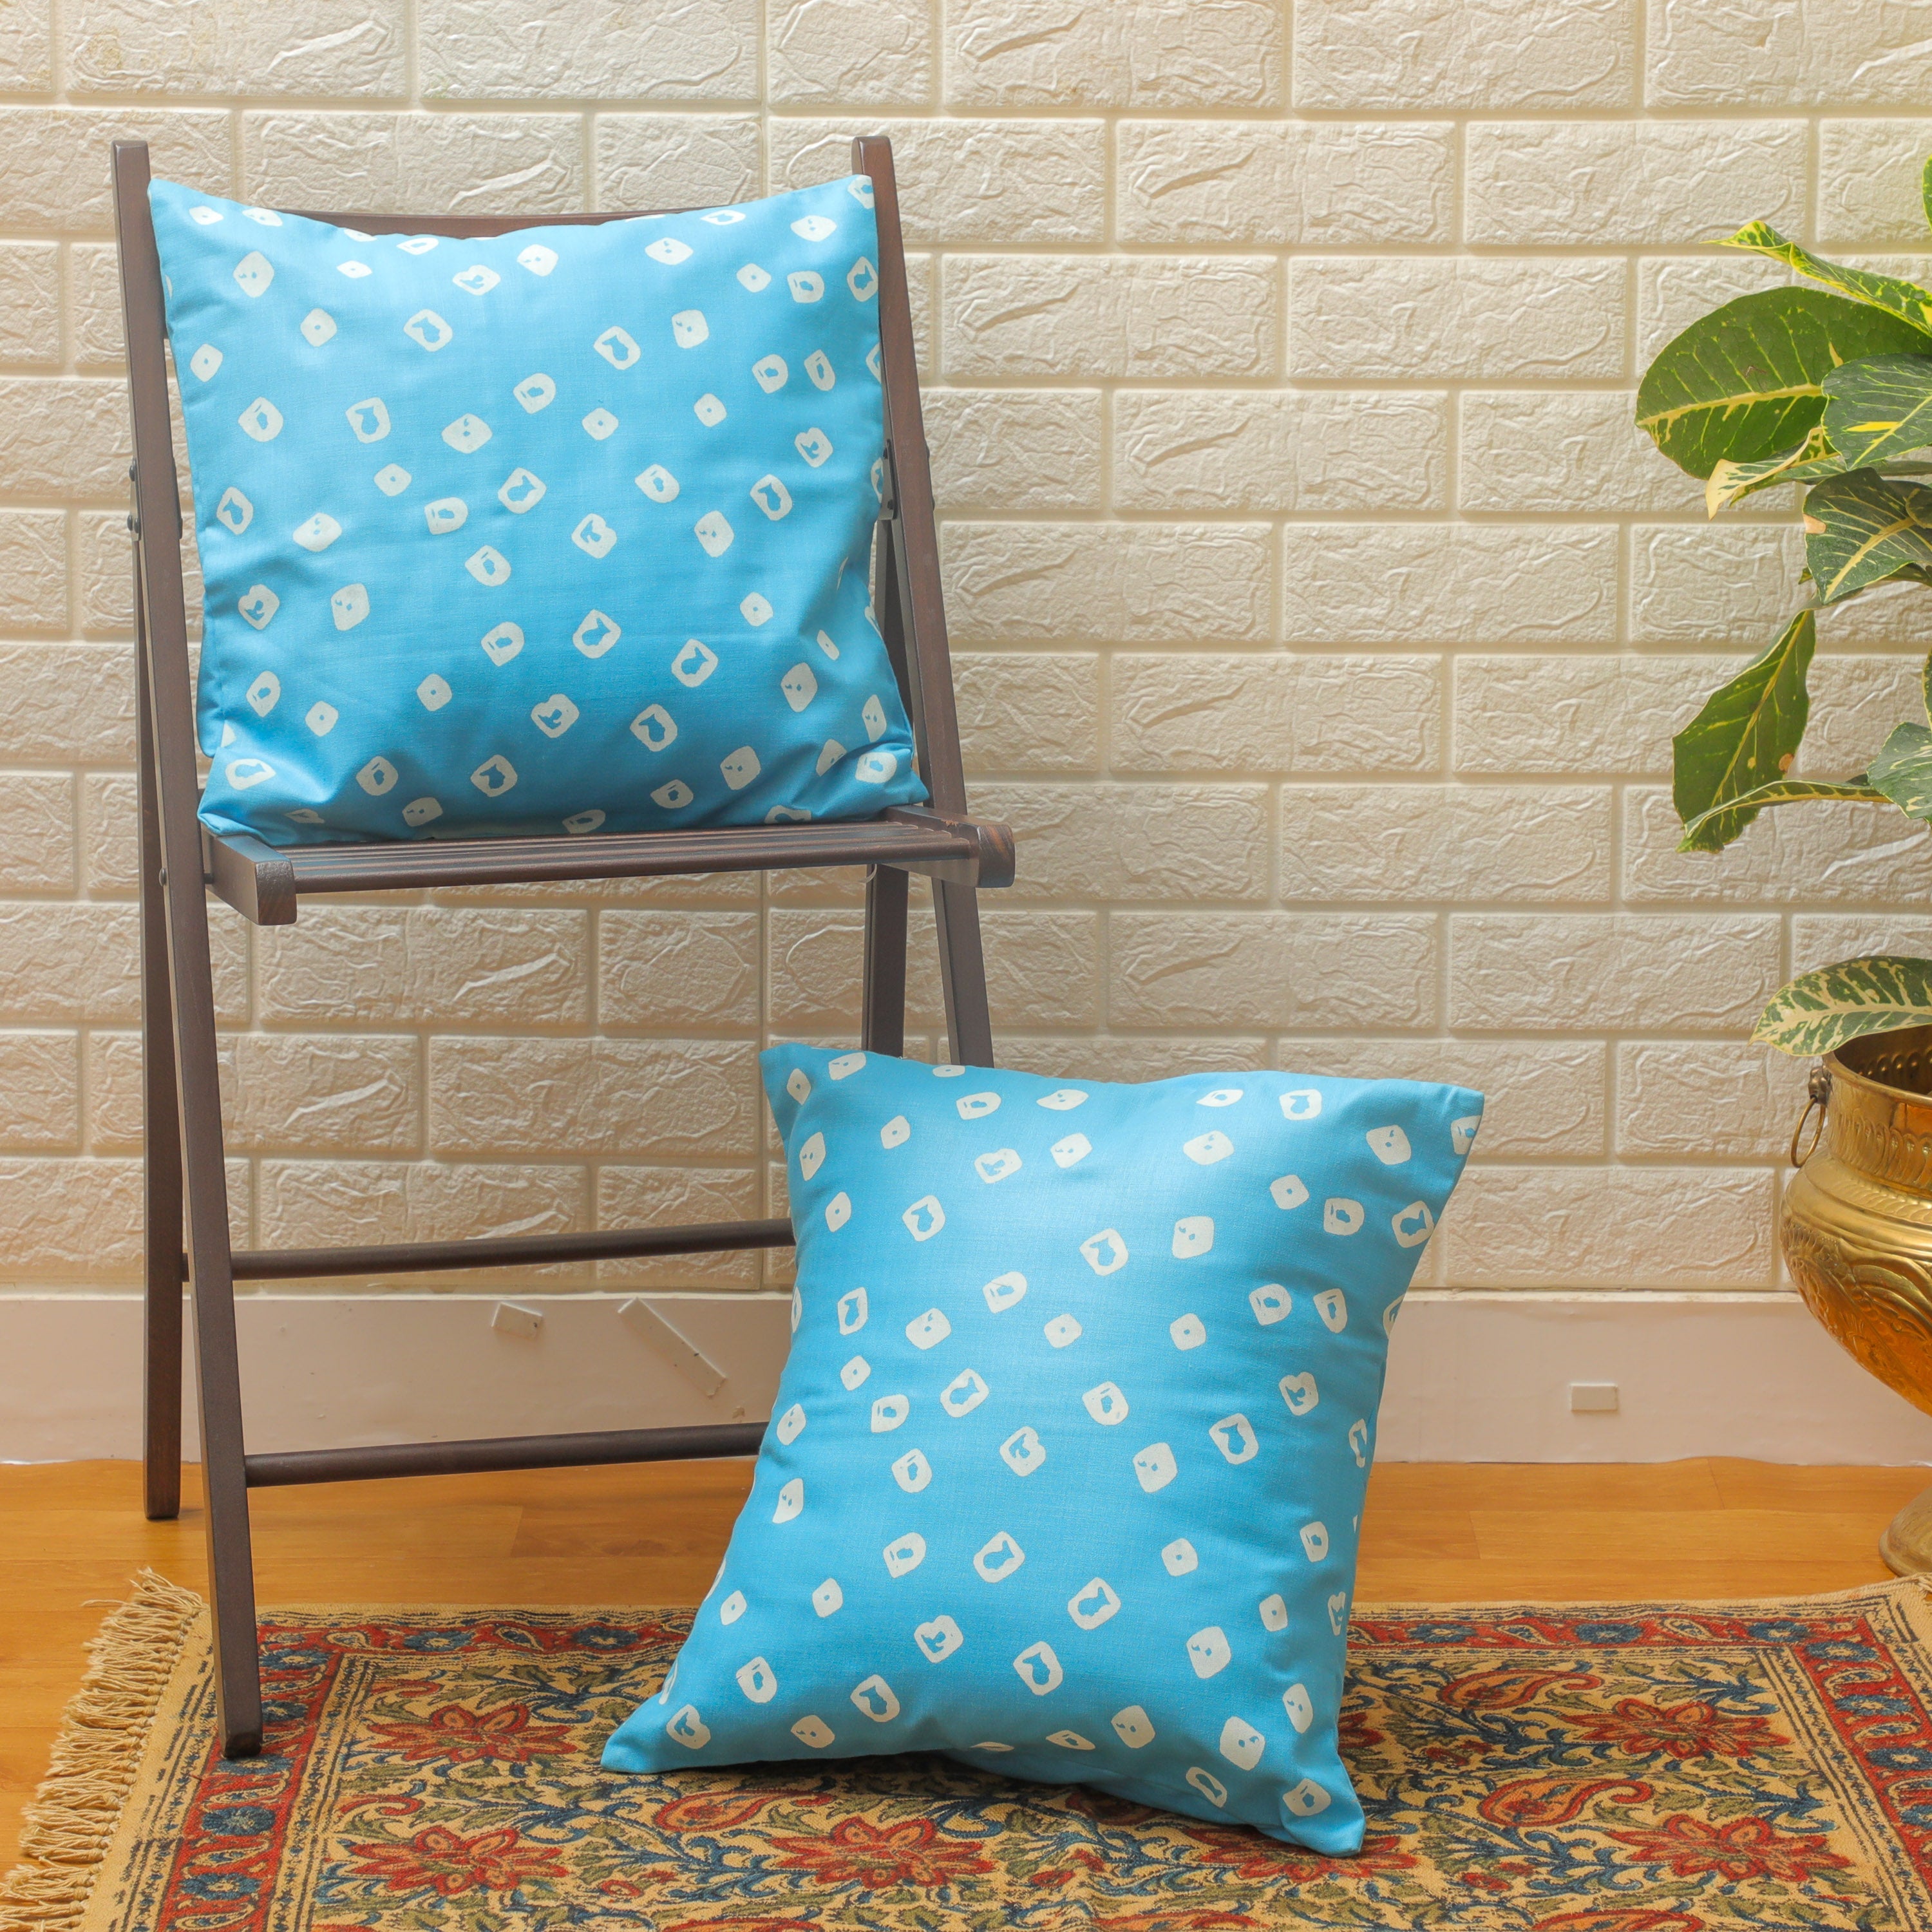 blue cushion is the perfect addition to any room in need of a colorful update